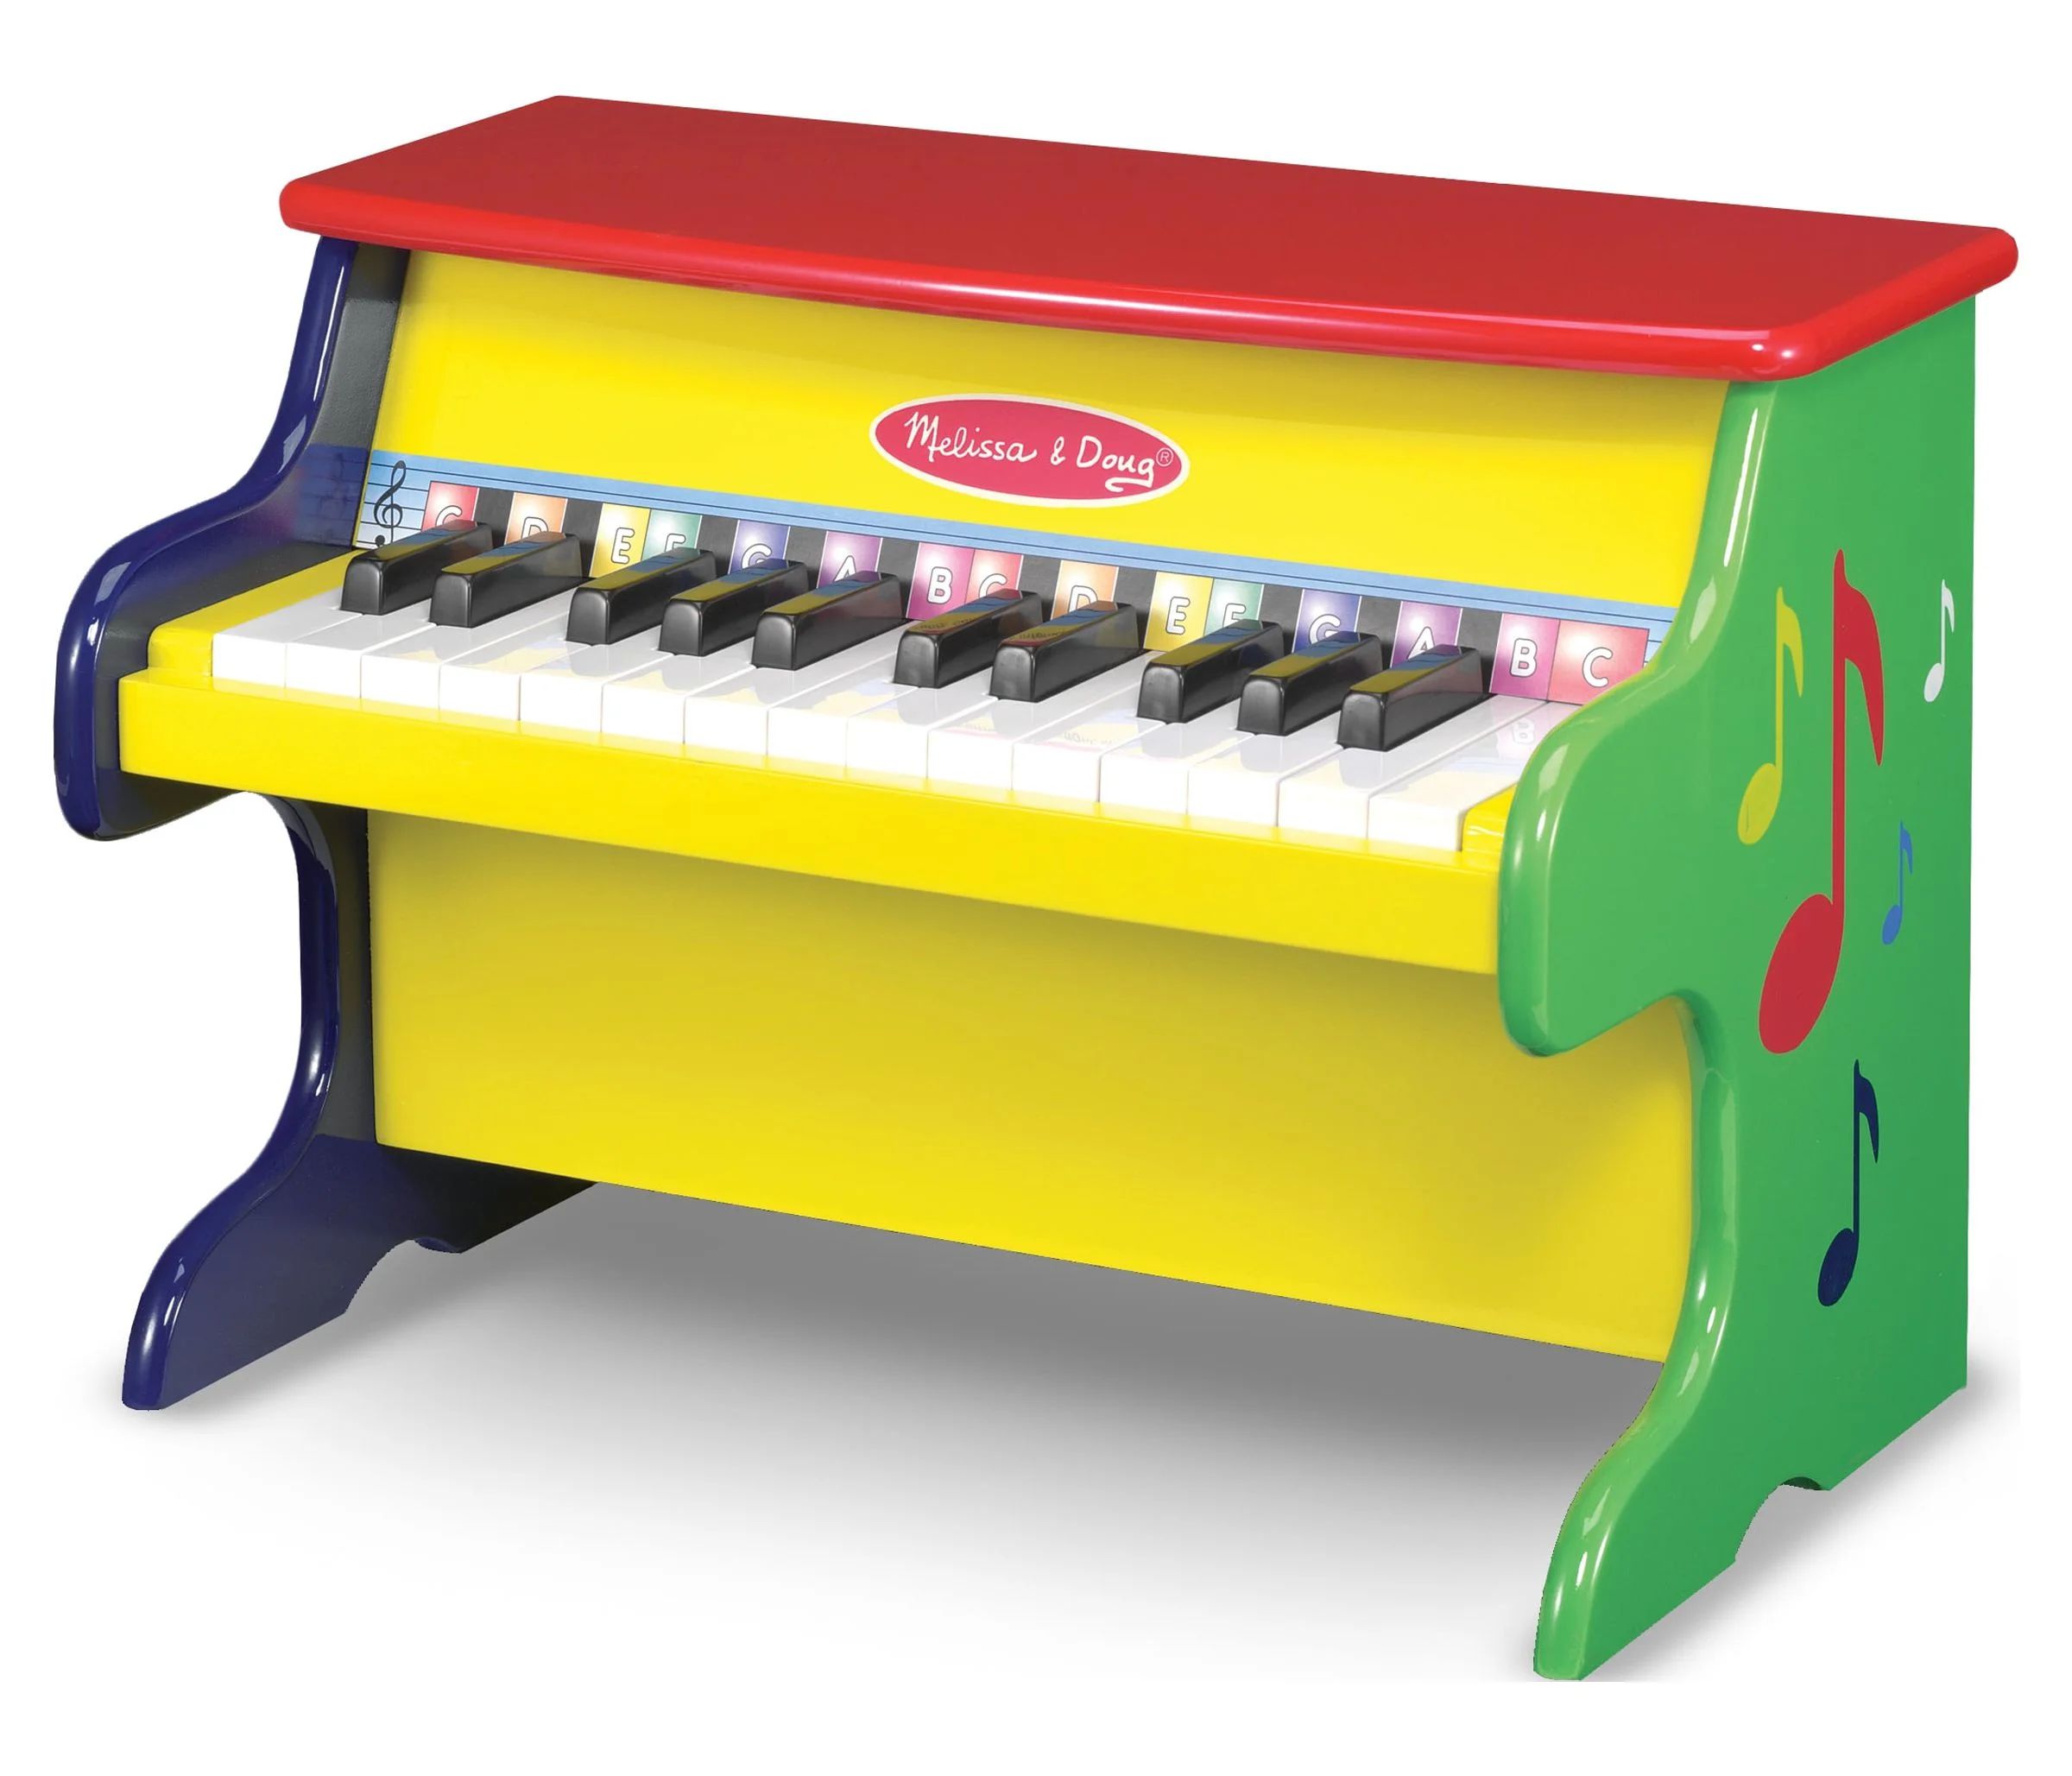 Melissa & Doug Learn-To-Play Piano With 25 Keys and Color-Coded Songbook - Mulit-Color - Toy Pian... | Walmart (US)